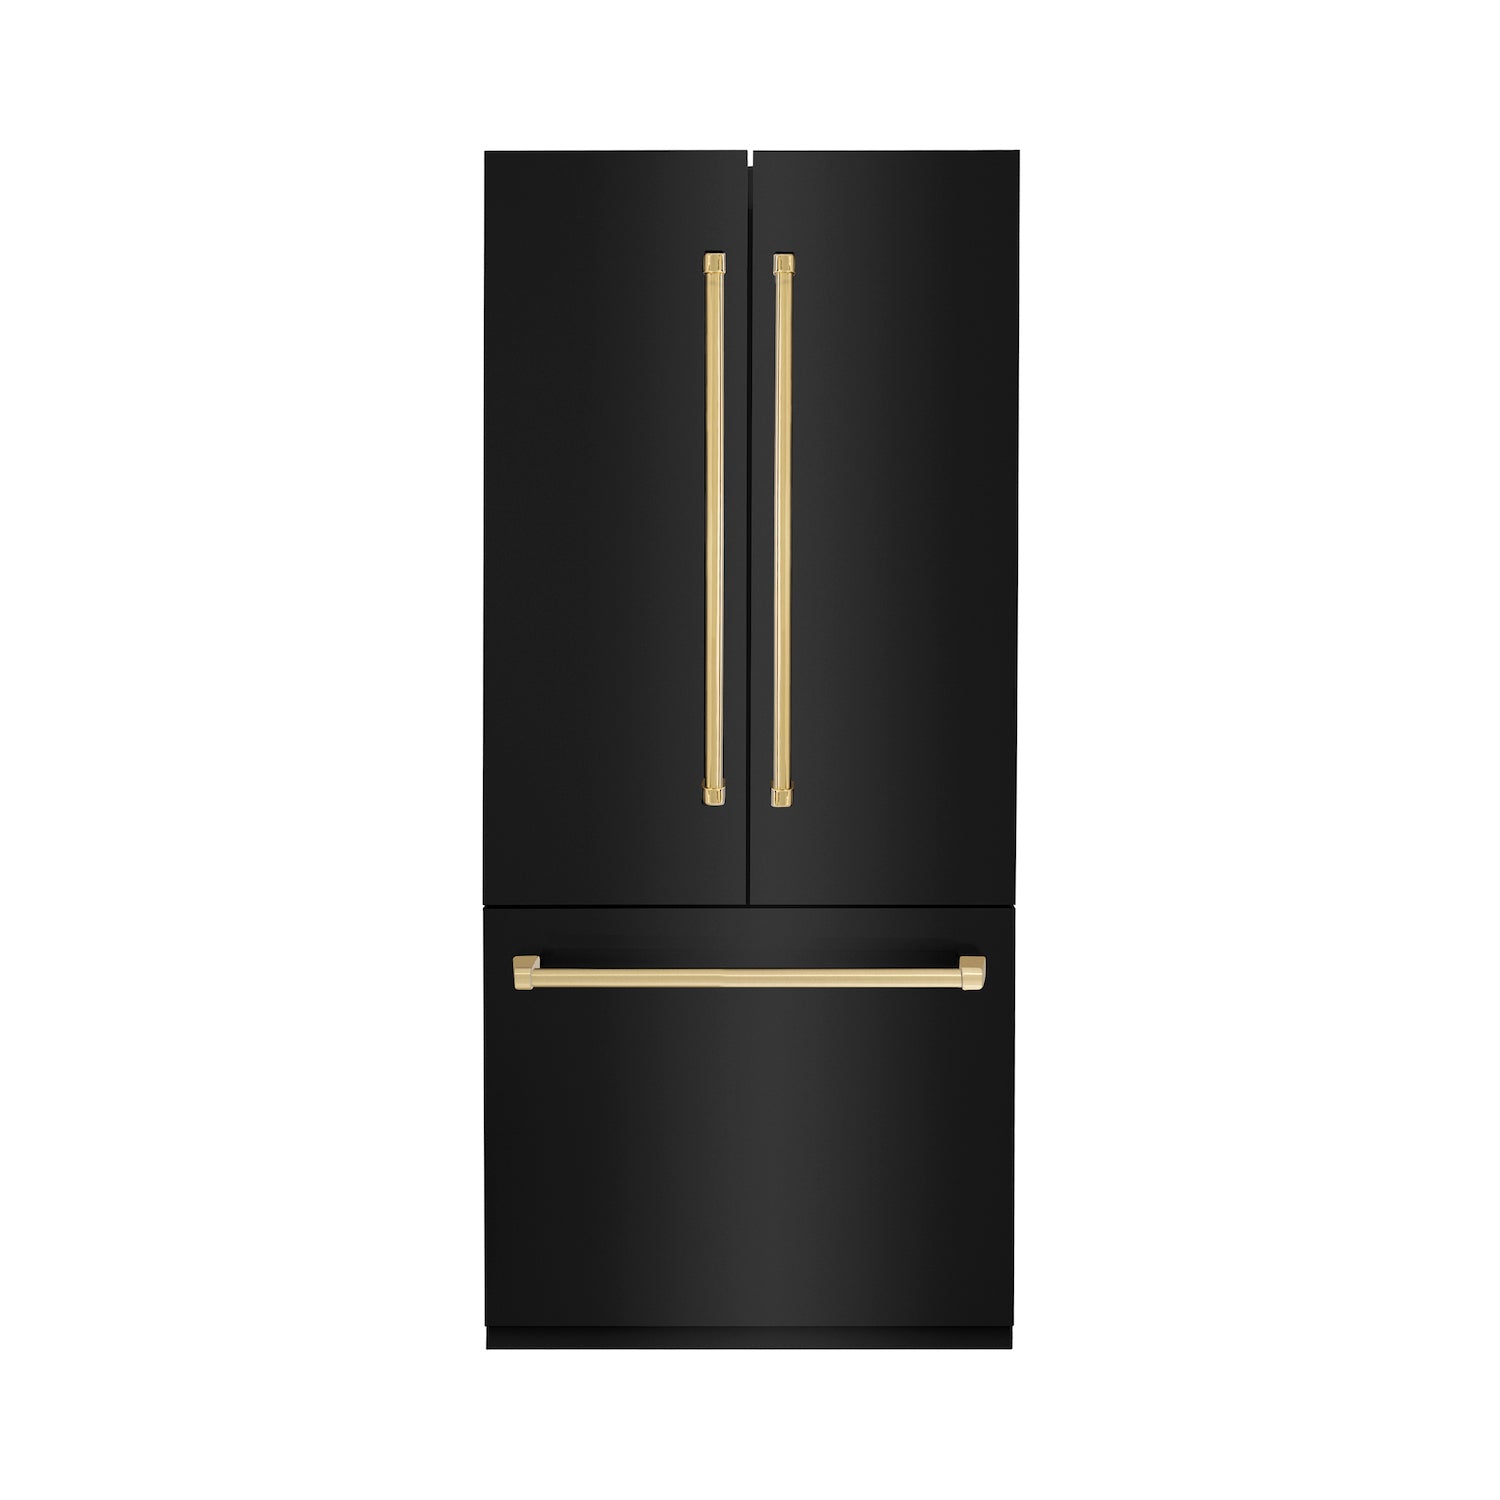 ZLINE Autograph Edition 36 in. 19.6 cu. ft. Built-in 2-Door Bottom Freezer Refrigerator with Internal Water and Ice Dispenser in Black Stainless Steel with Polished Gold Accents (RBIVZ-BS-36-G)